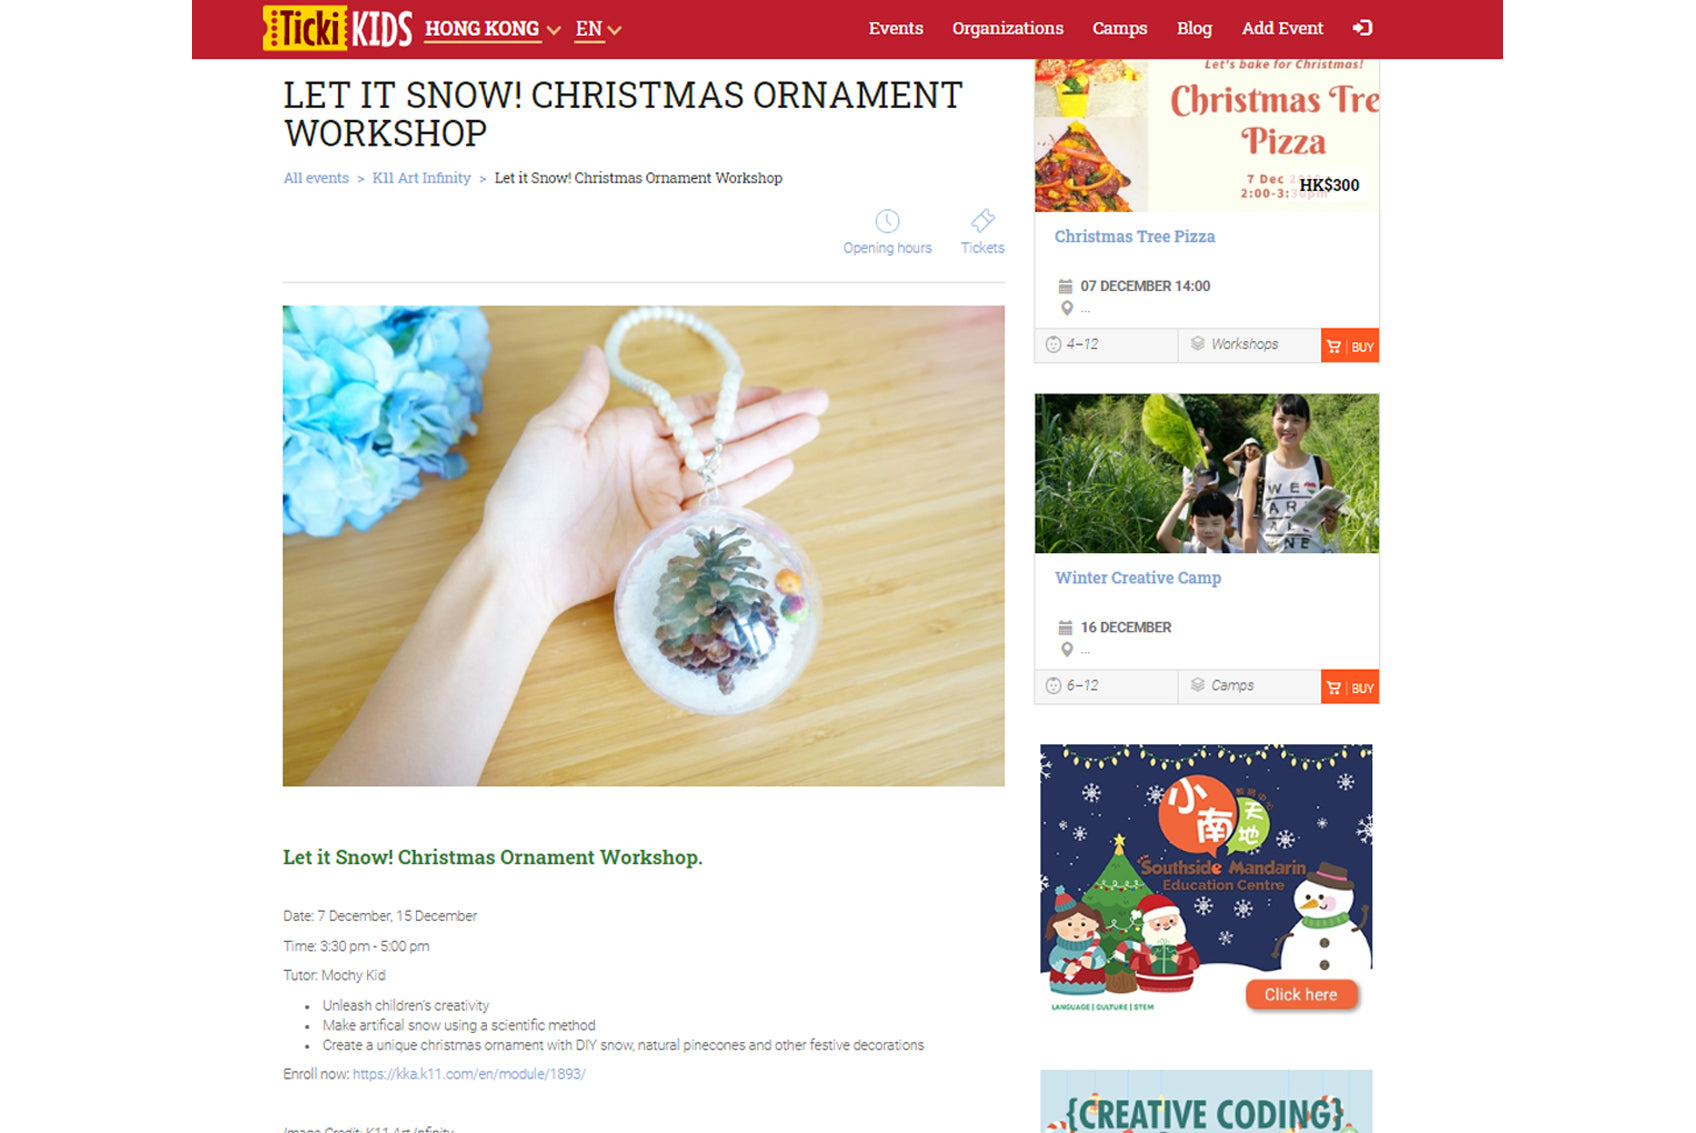 Featured in Tickikids: Let It Snow! Christmas Ornament Workshop at K11 MUSEA